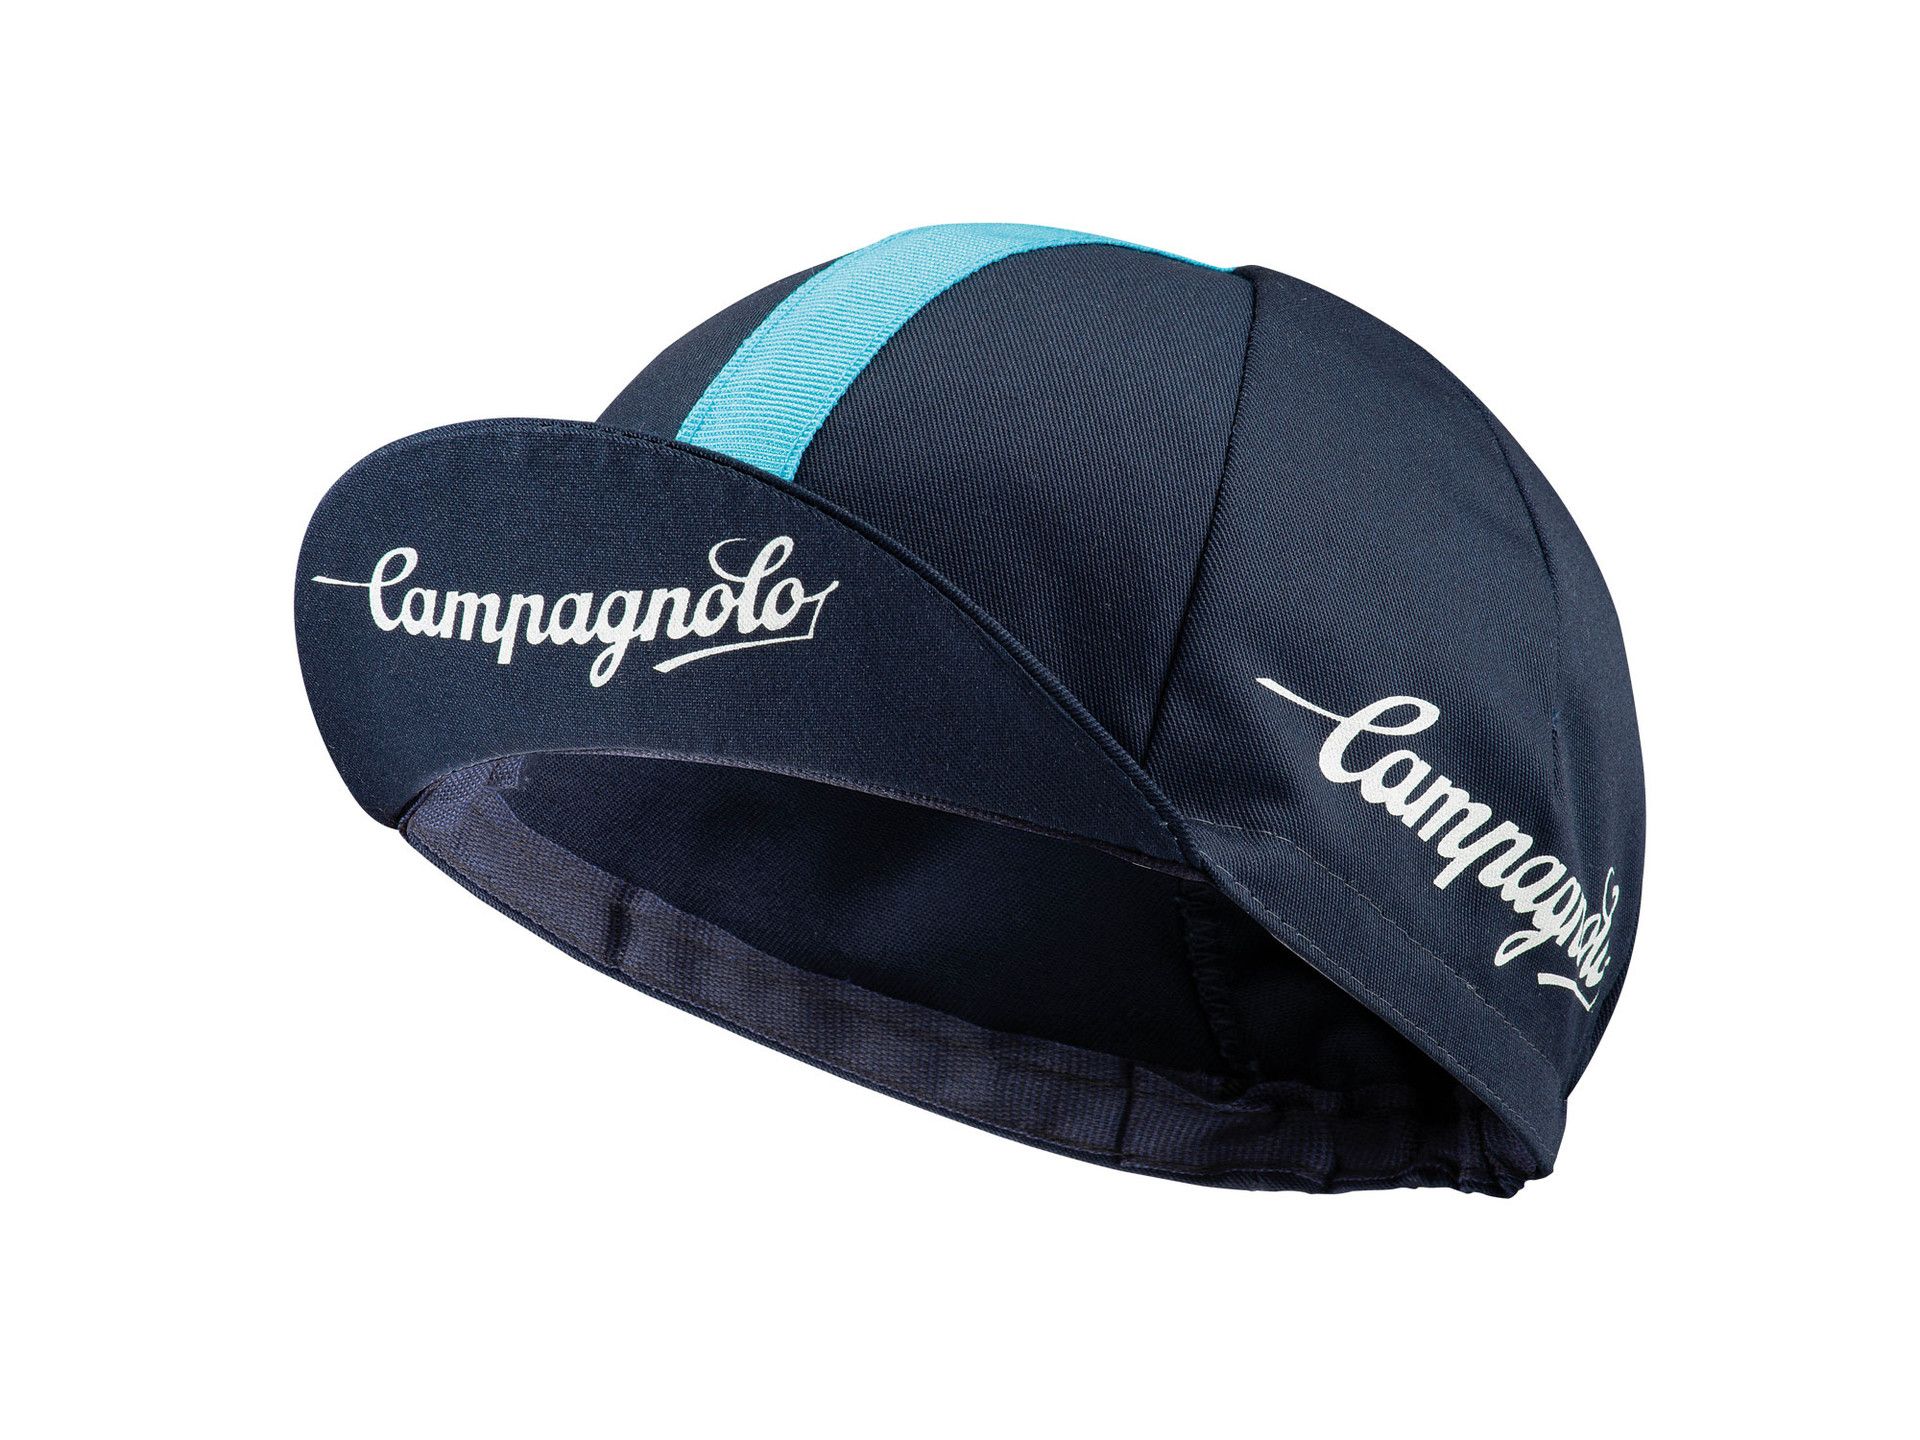 Vintage style merino wool CYCLING CAP Campagnolo 